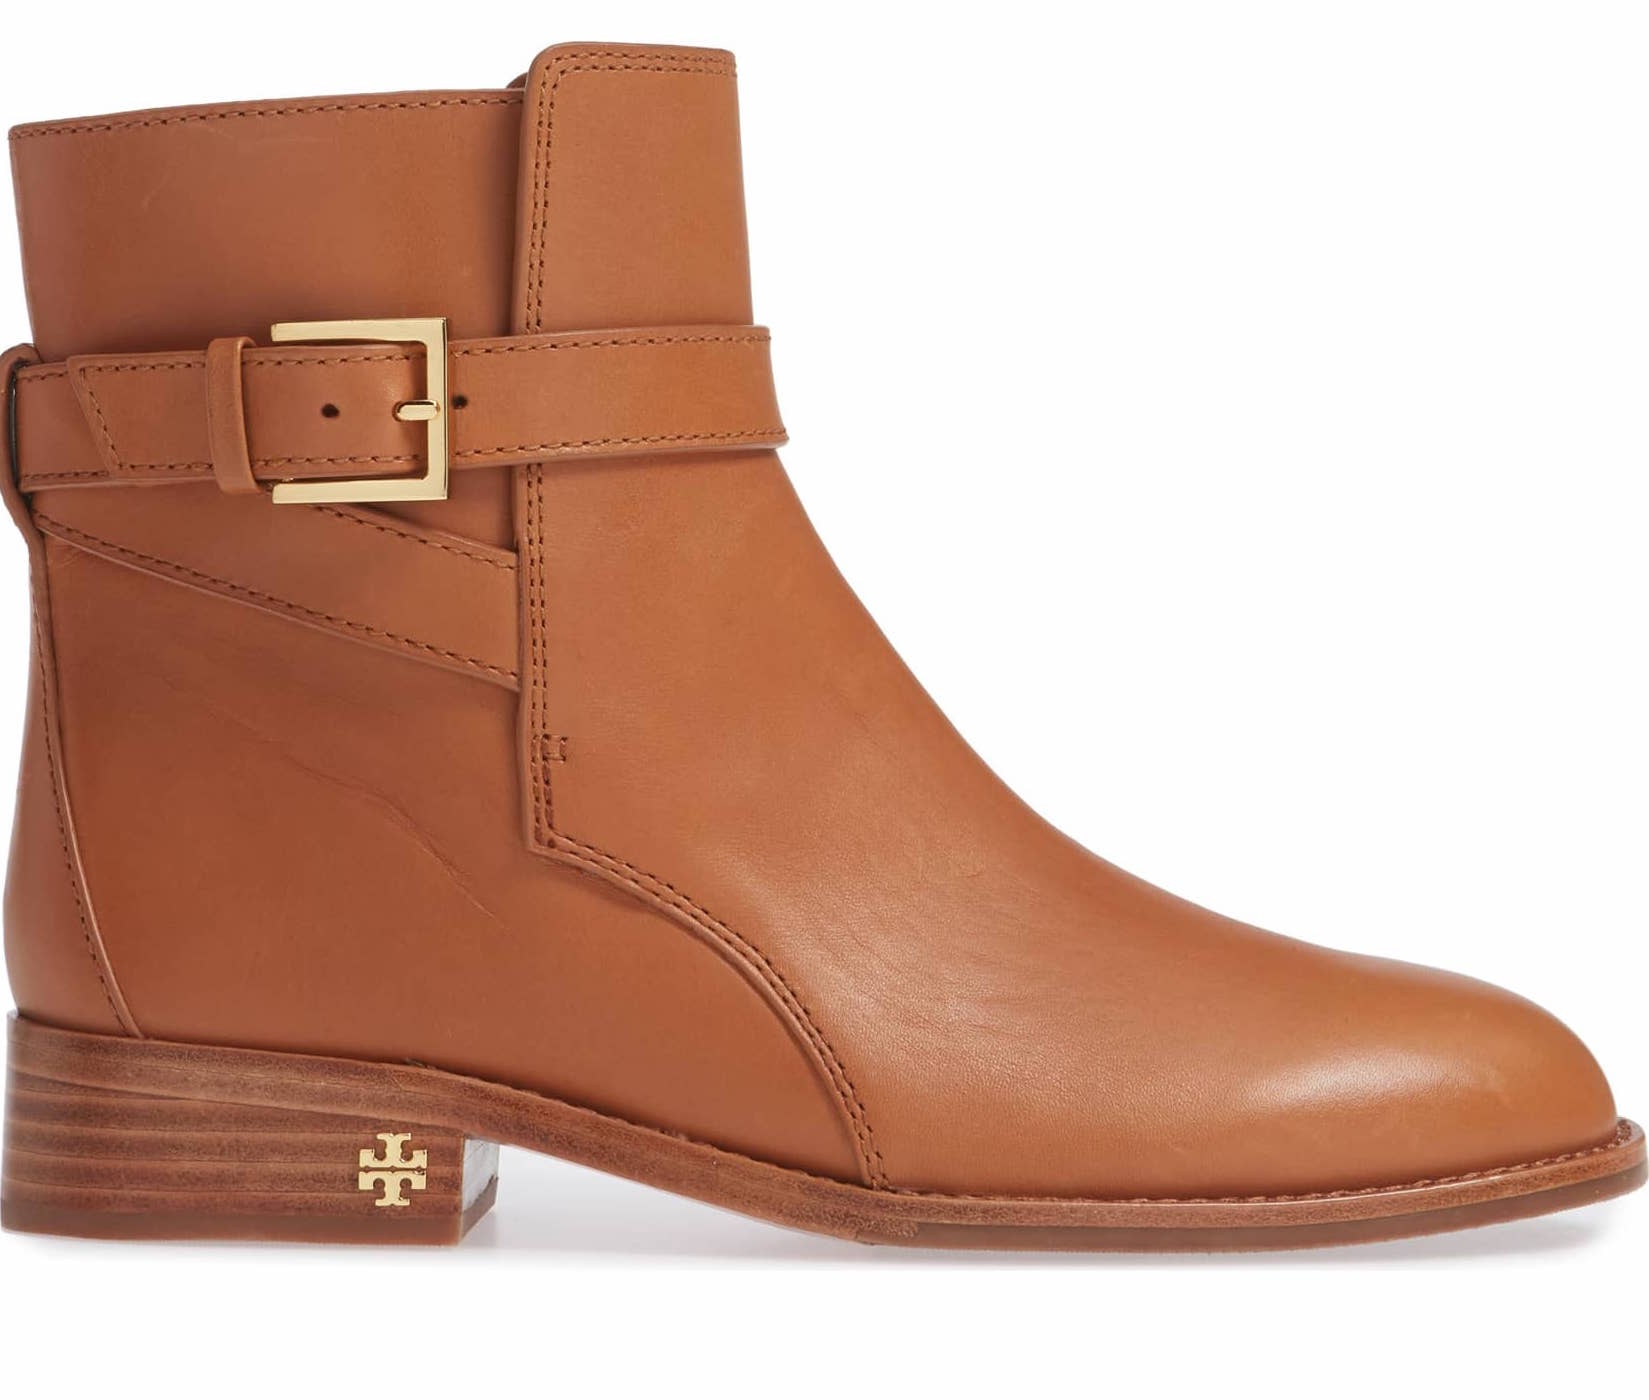 So Many Tory Burch Boots Are Half Off at Nordstrom